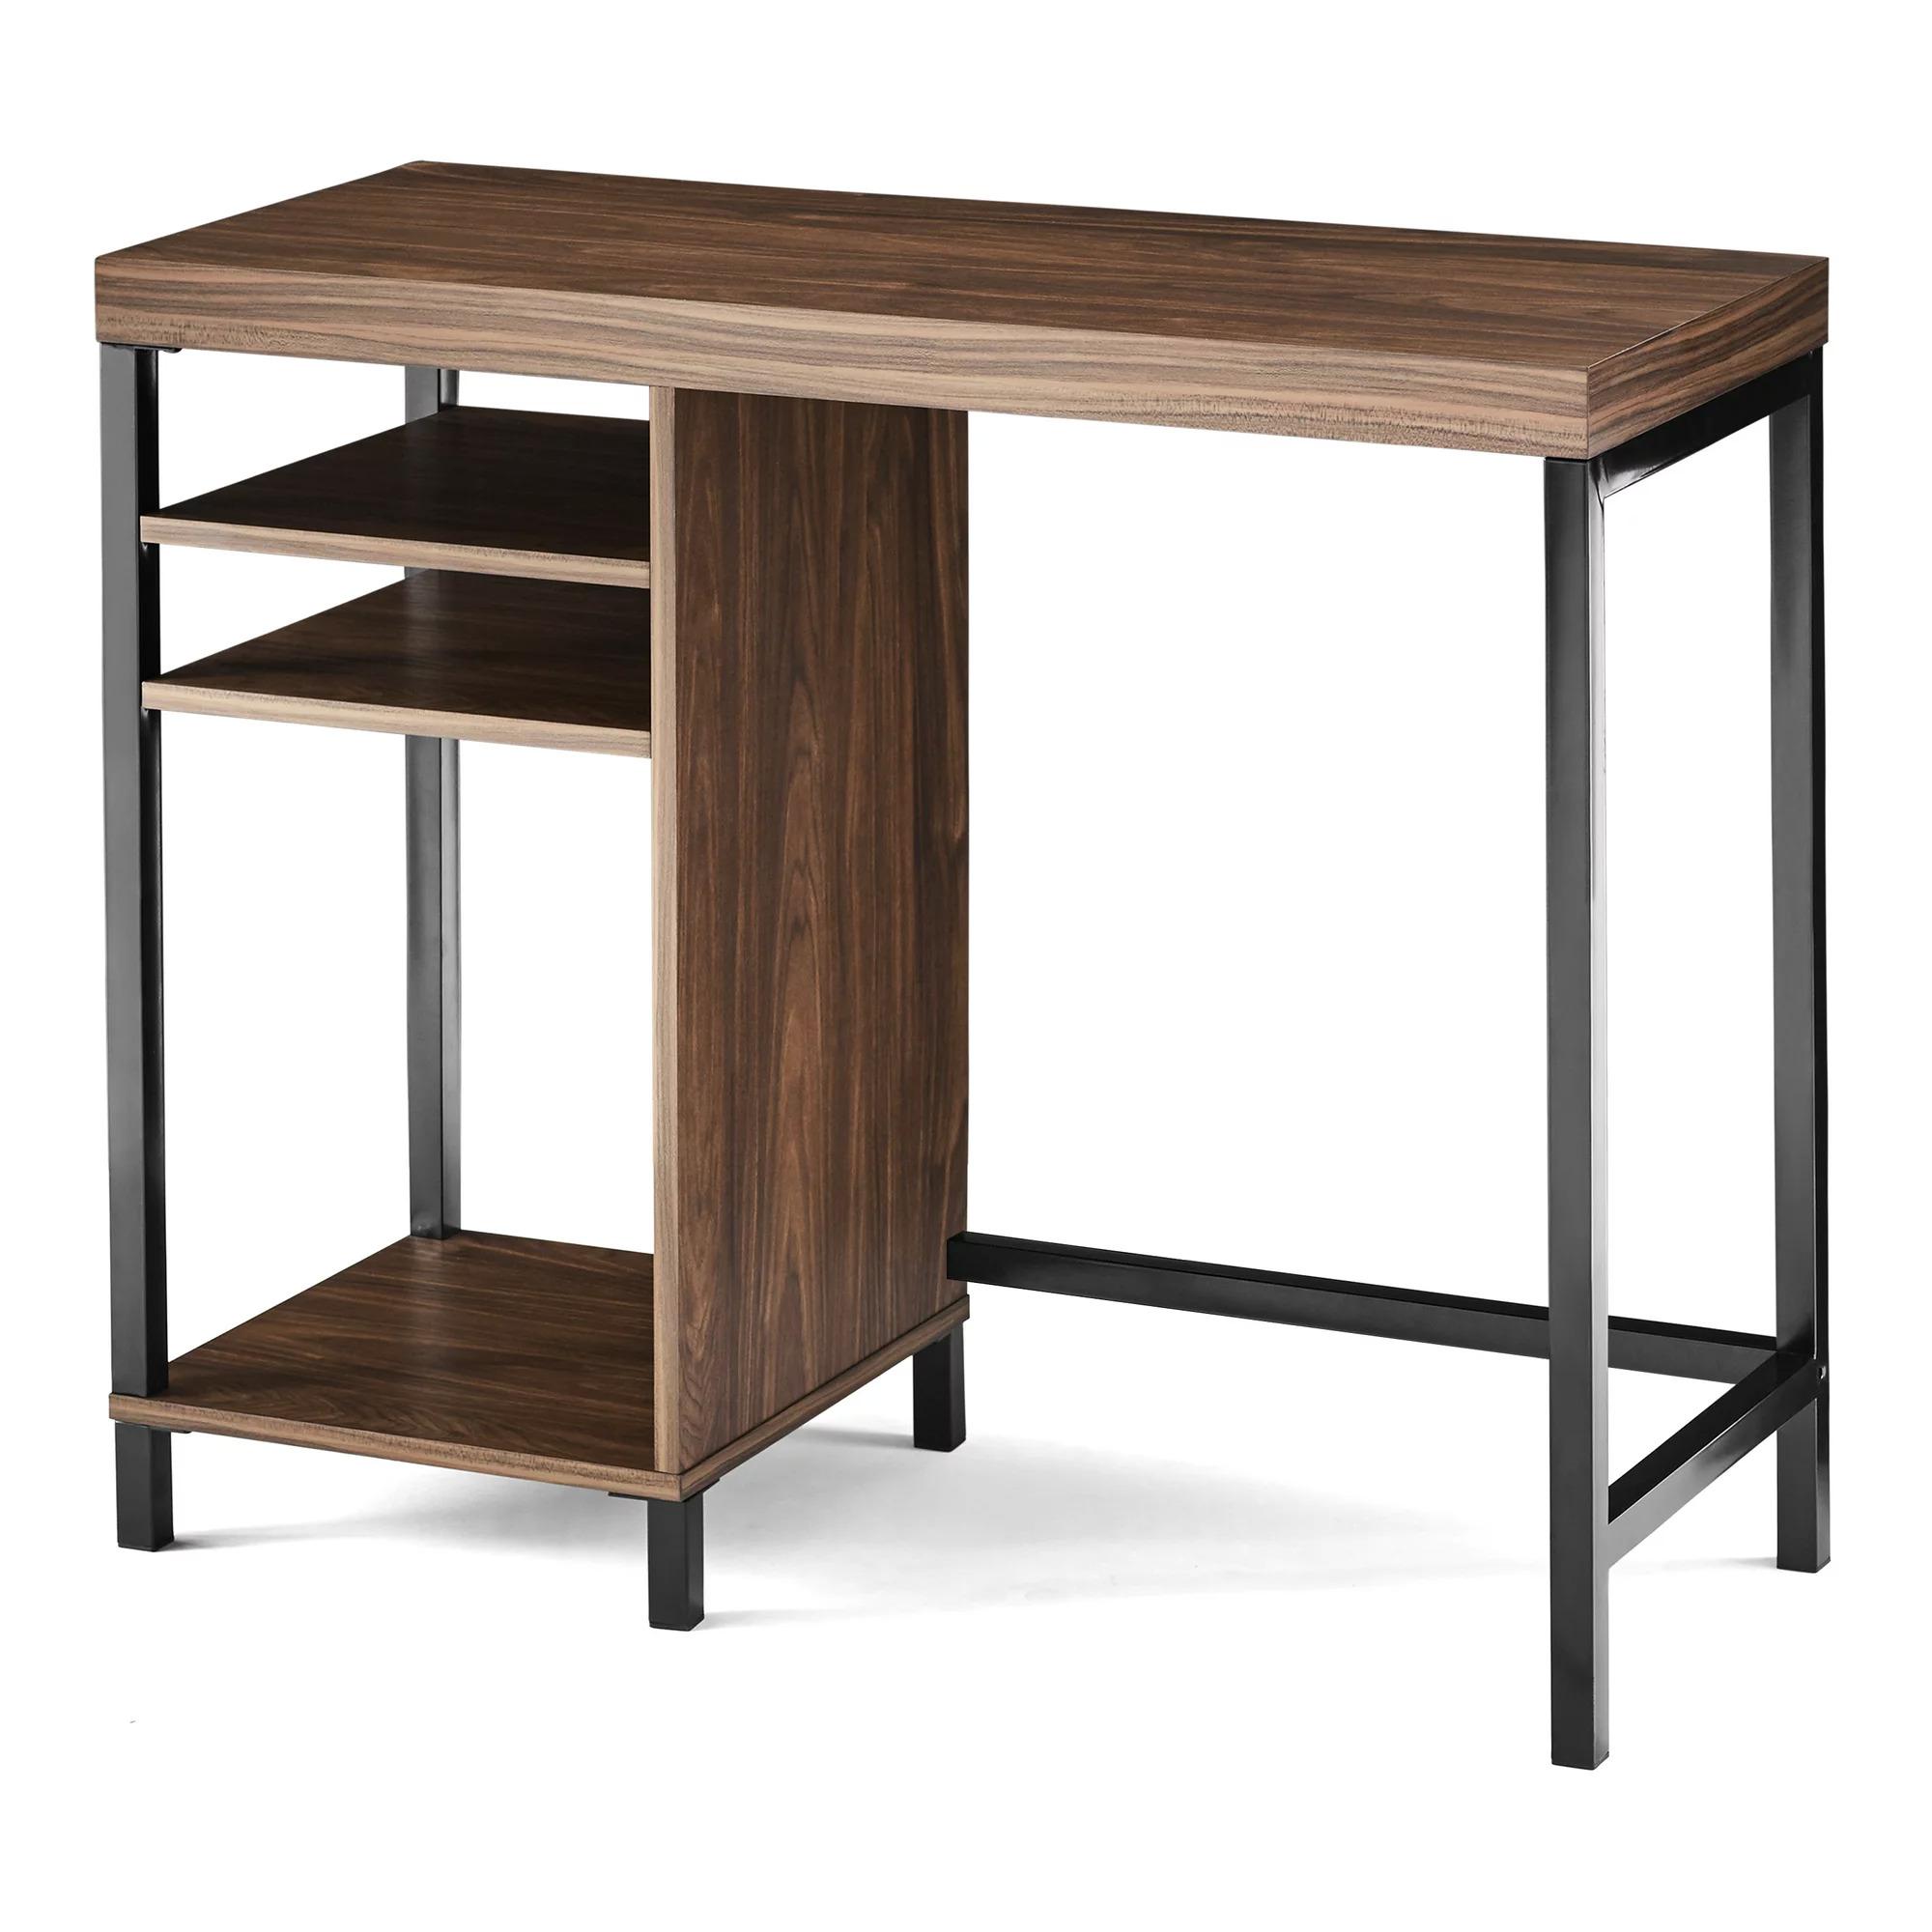 Mainstays Sumpter Park Cube Storage Desk for $39 Shipped